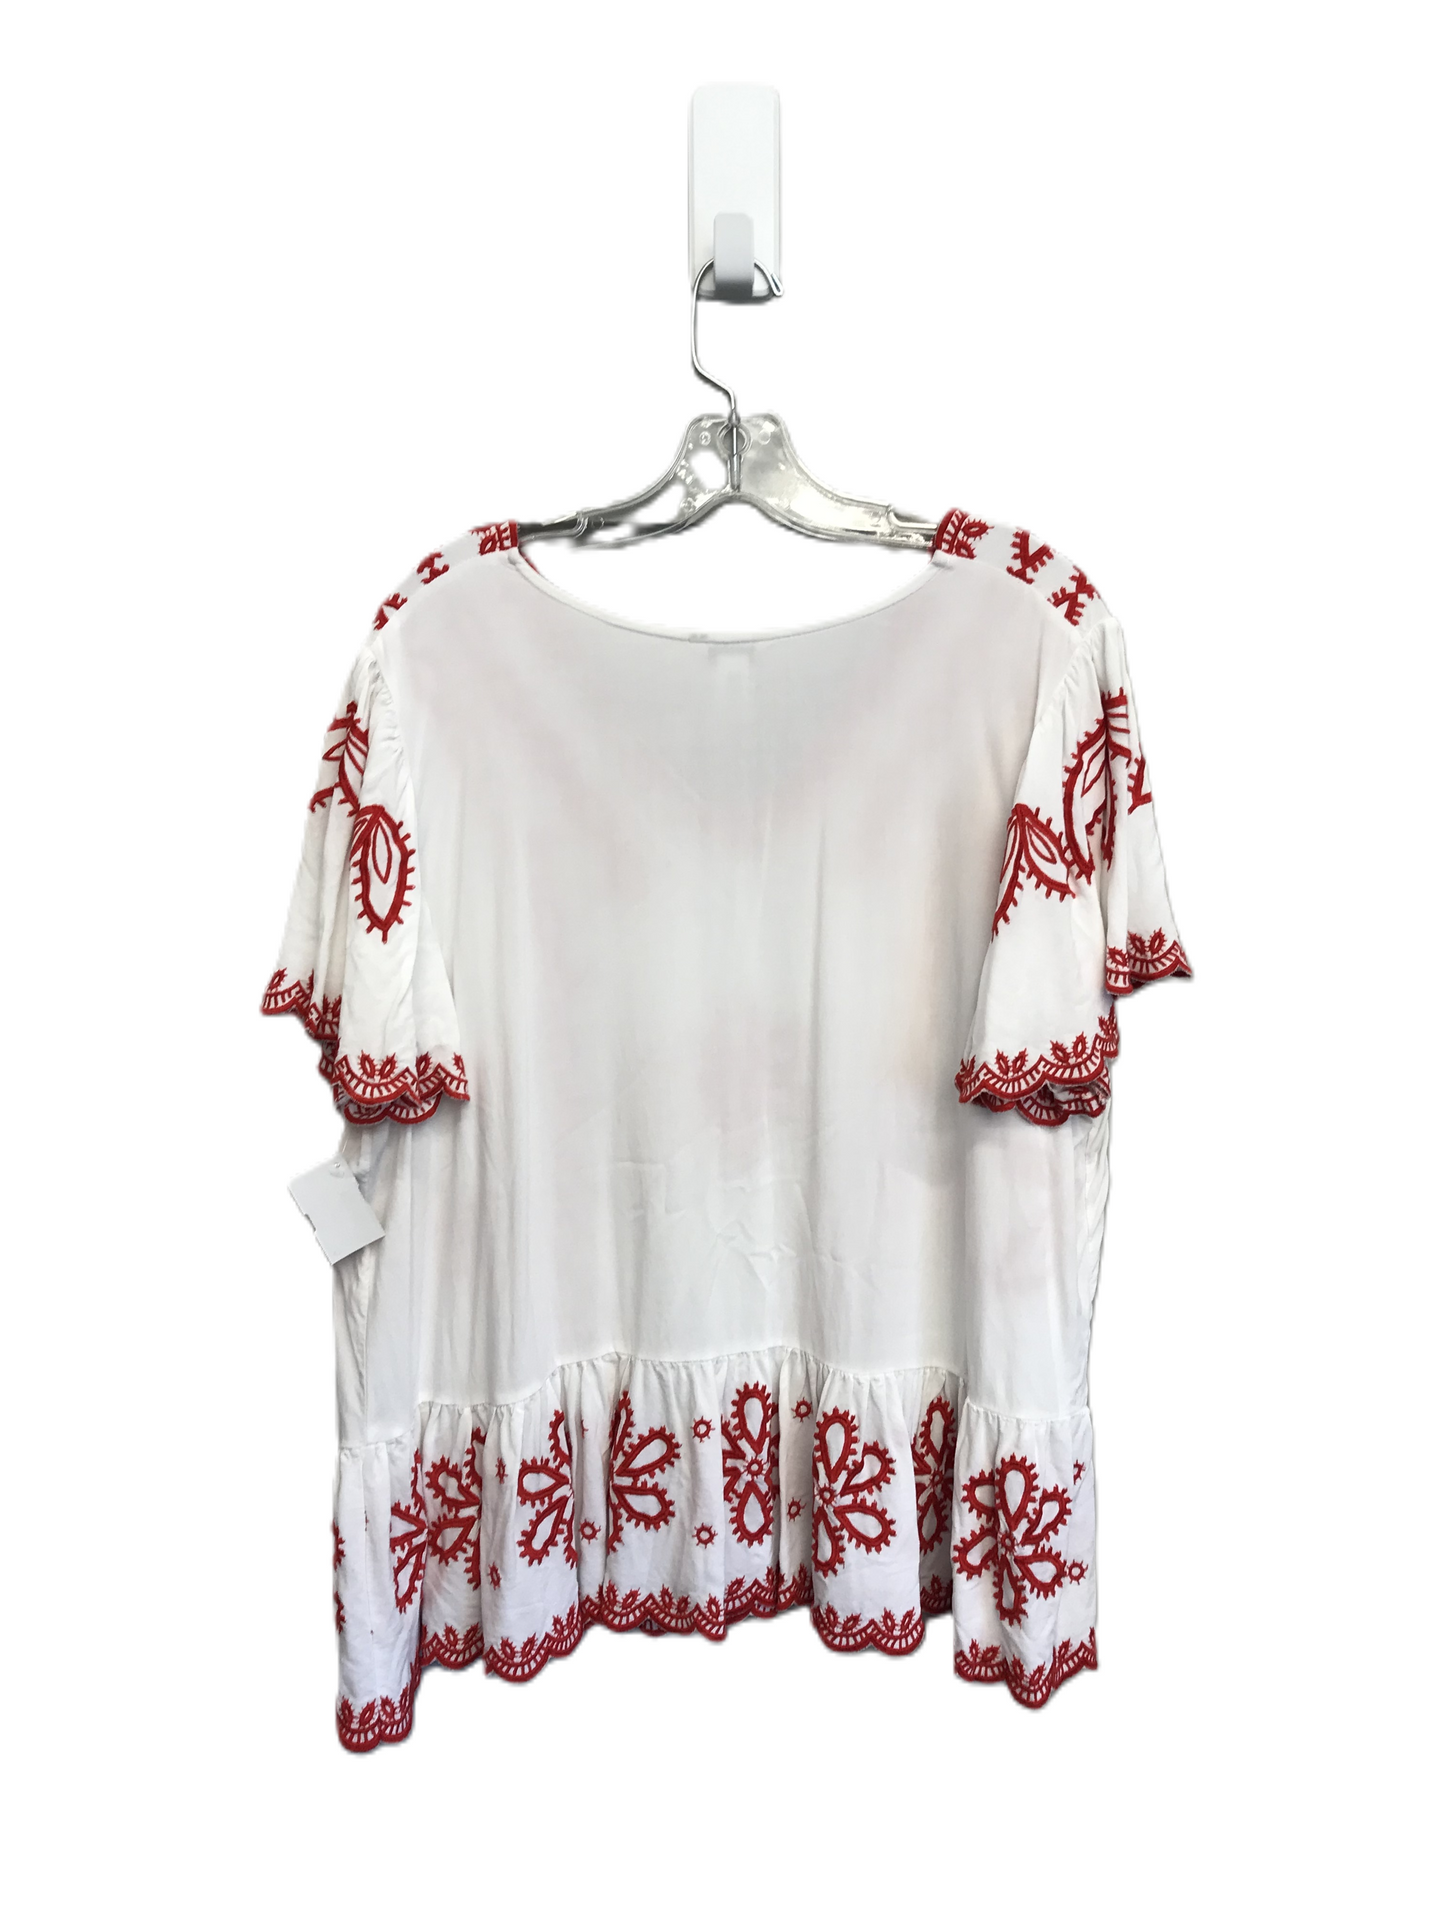 Red & White Top Short Sleeve By Cato, Size: 1x